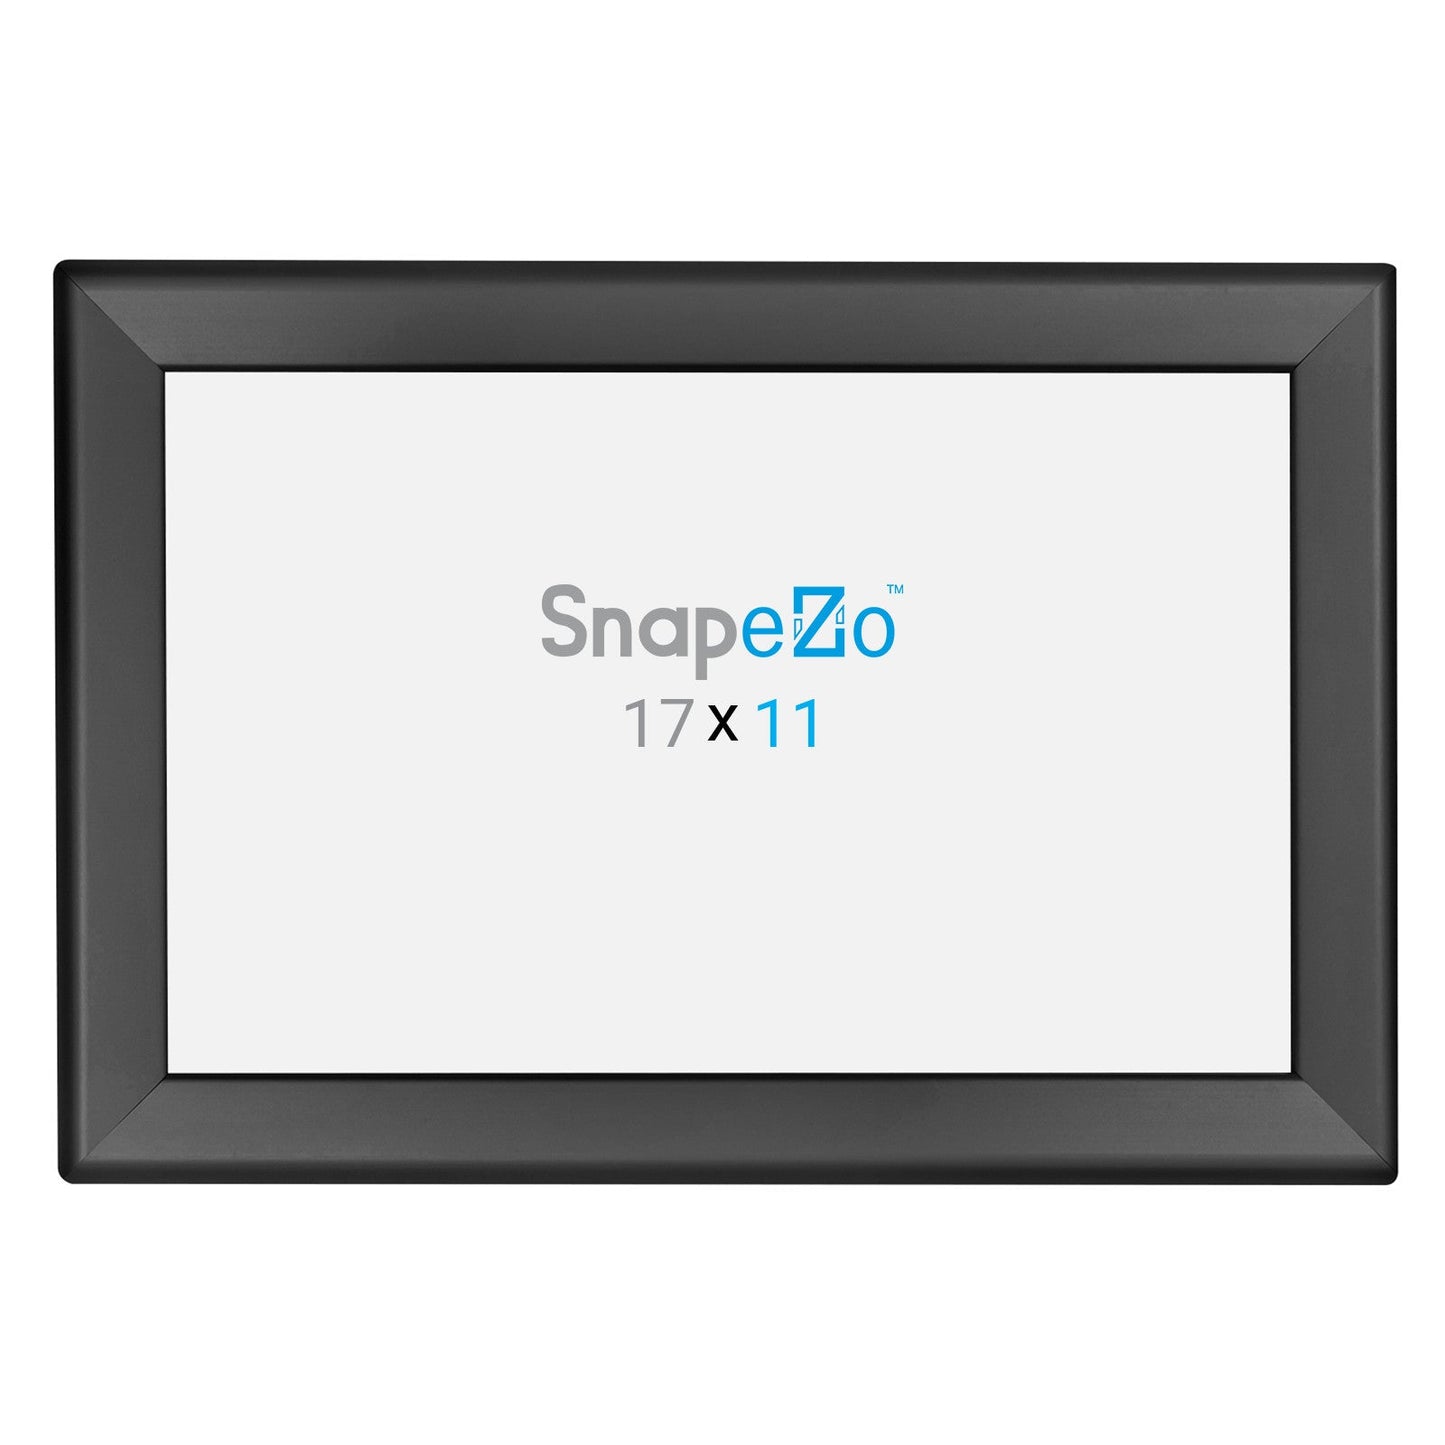 11x17 SnapeZo® Black Double-Sided Snap Frame 1.25" Profile Width